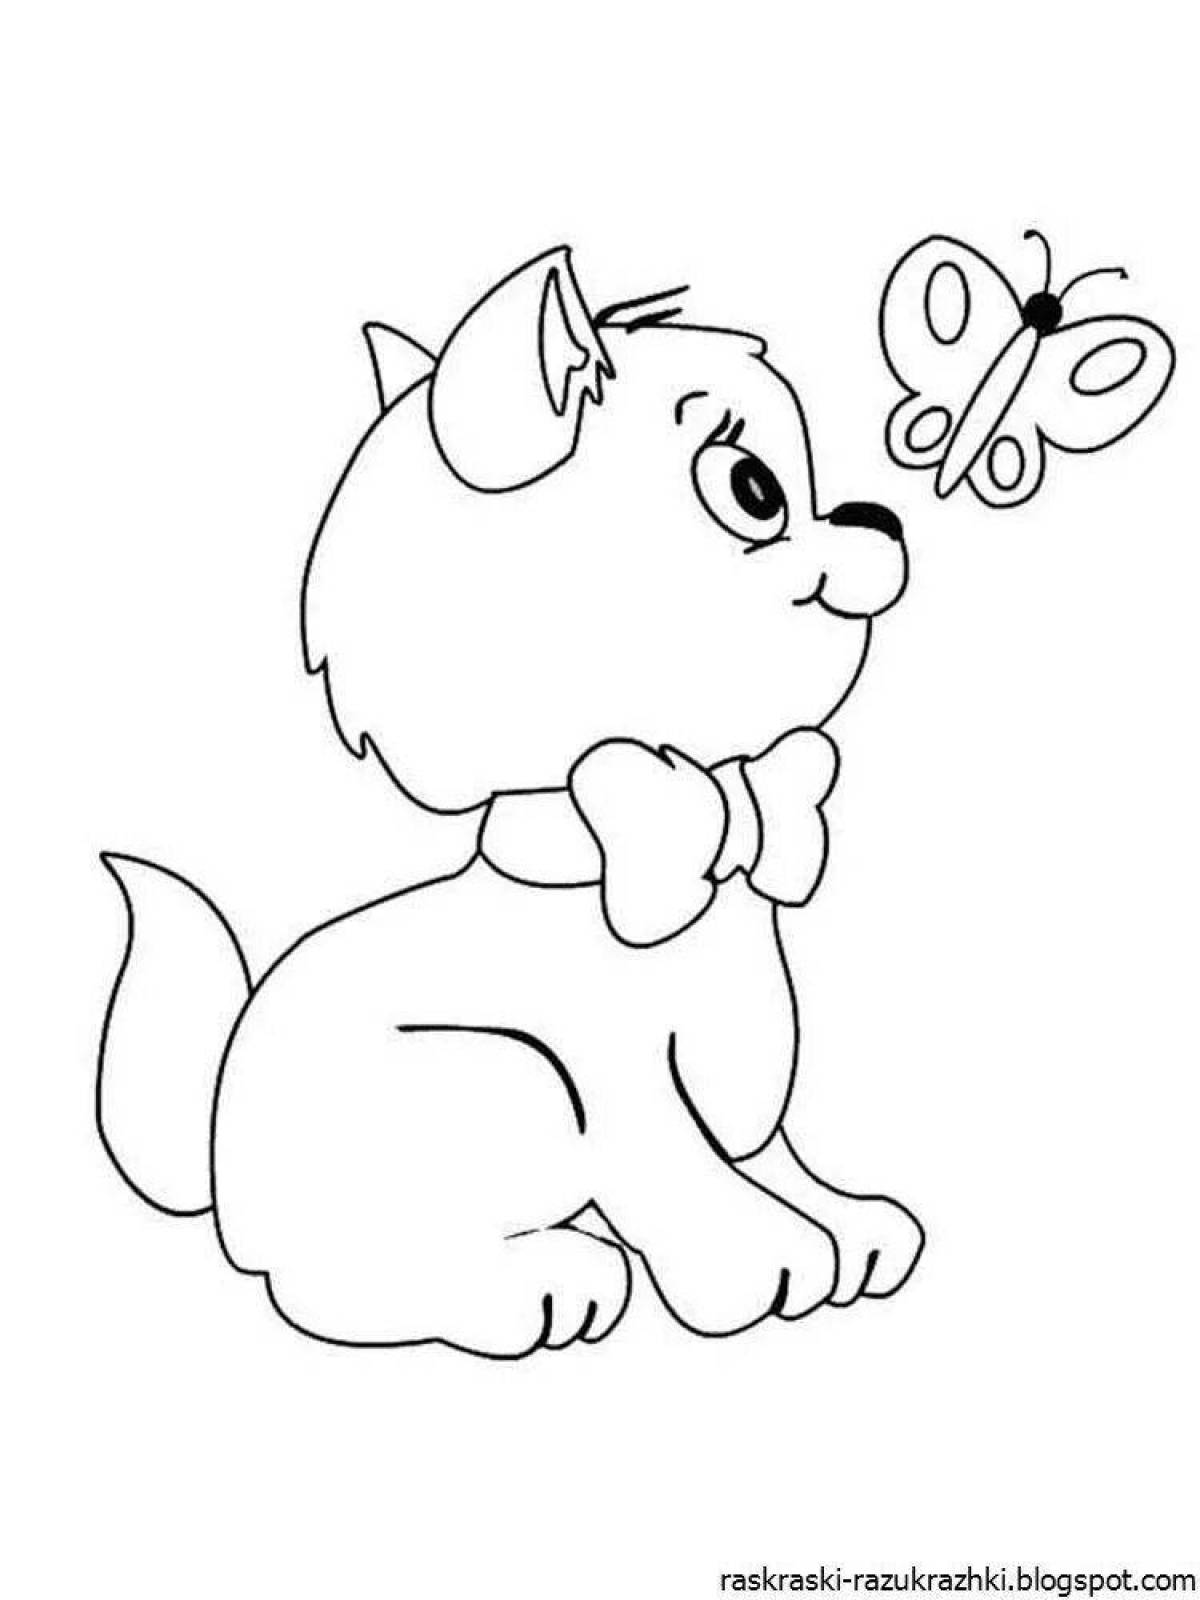 Coloring pages for girls 1 year old